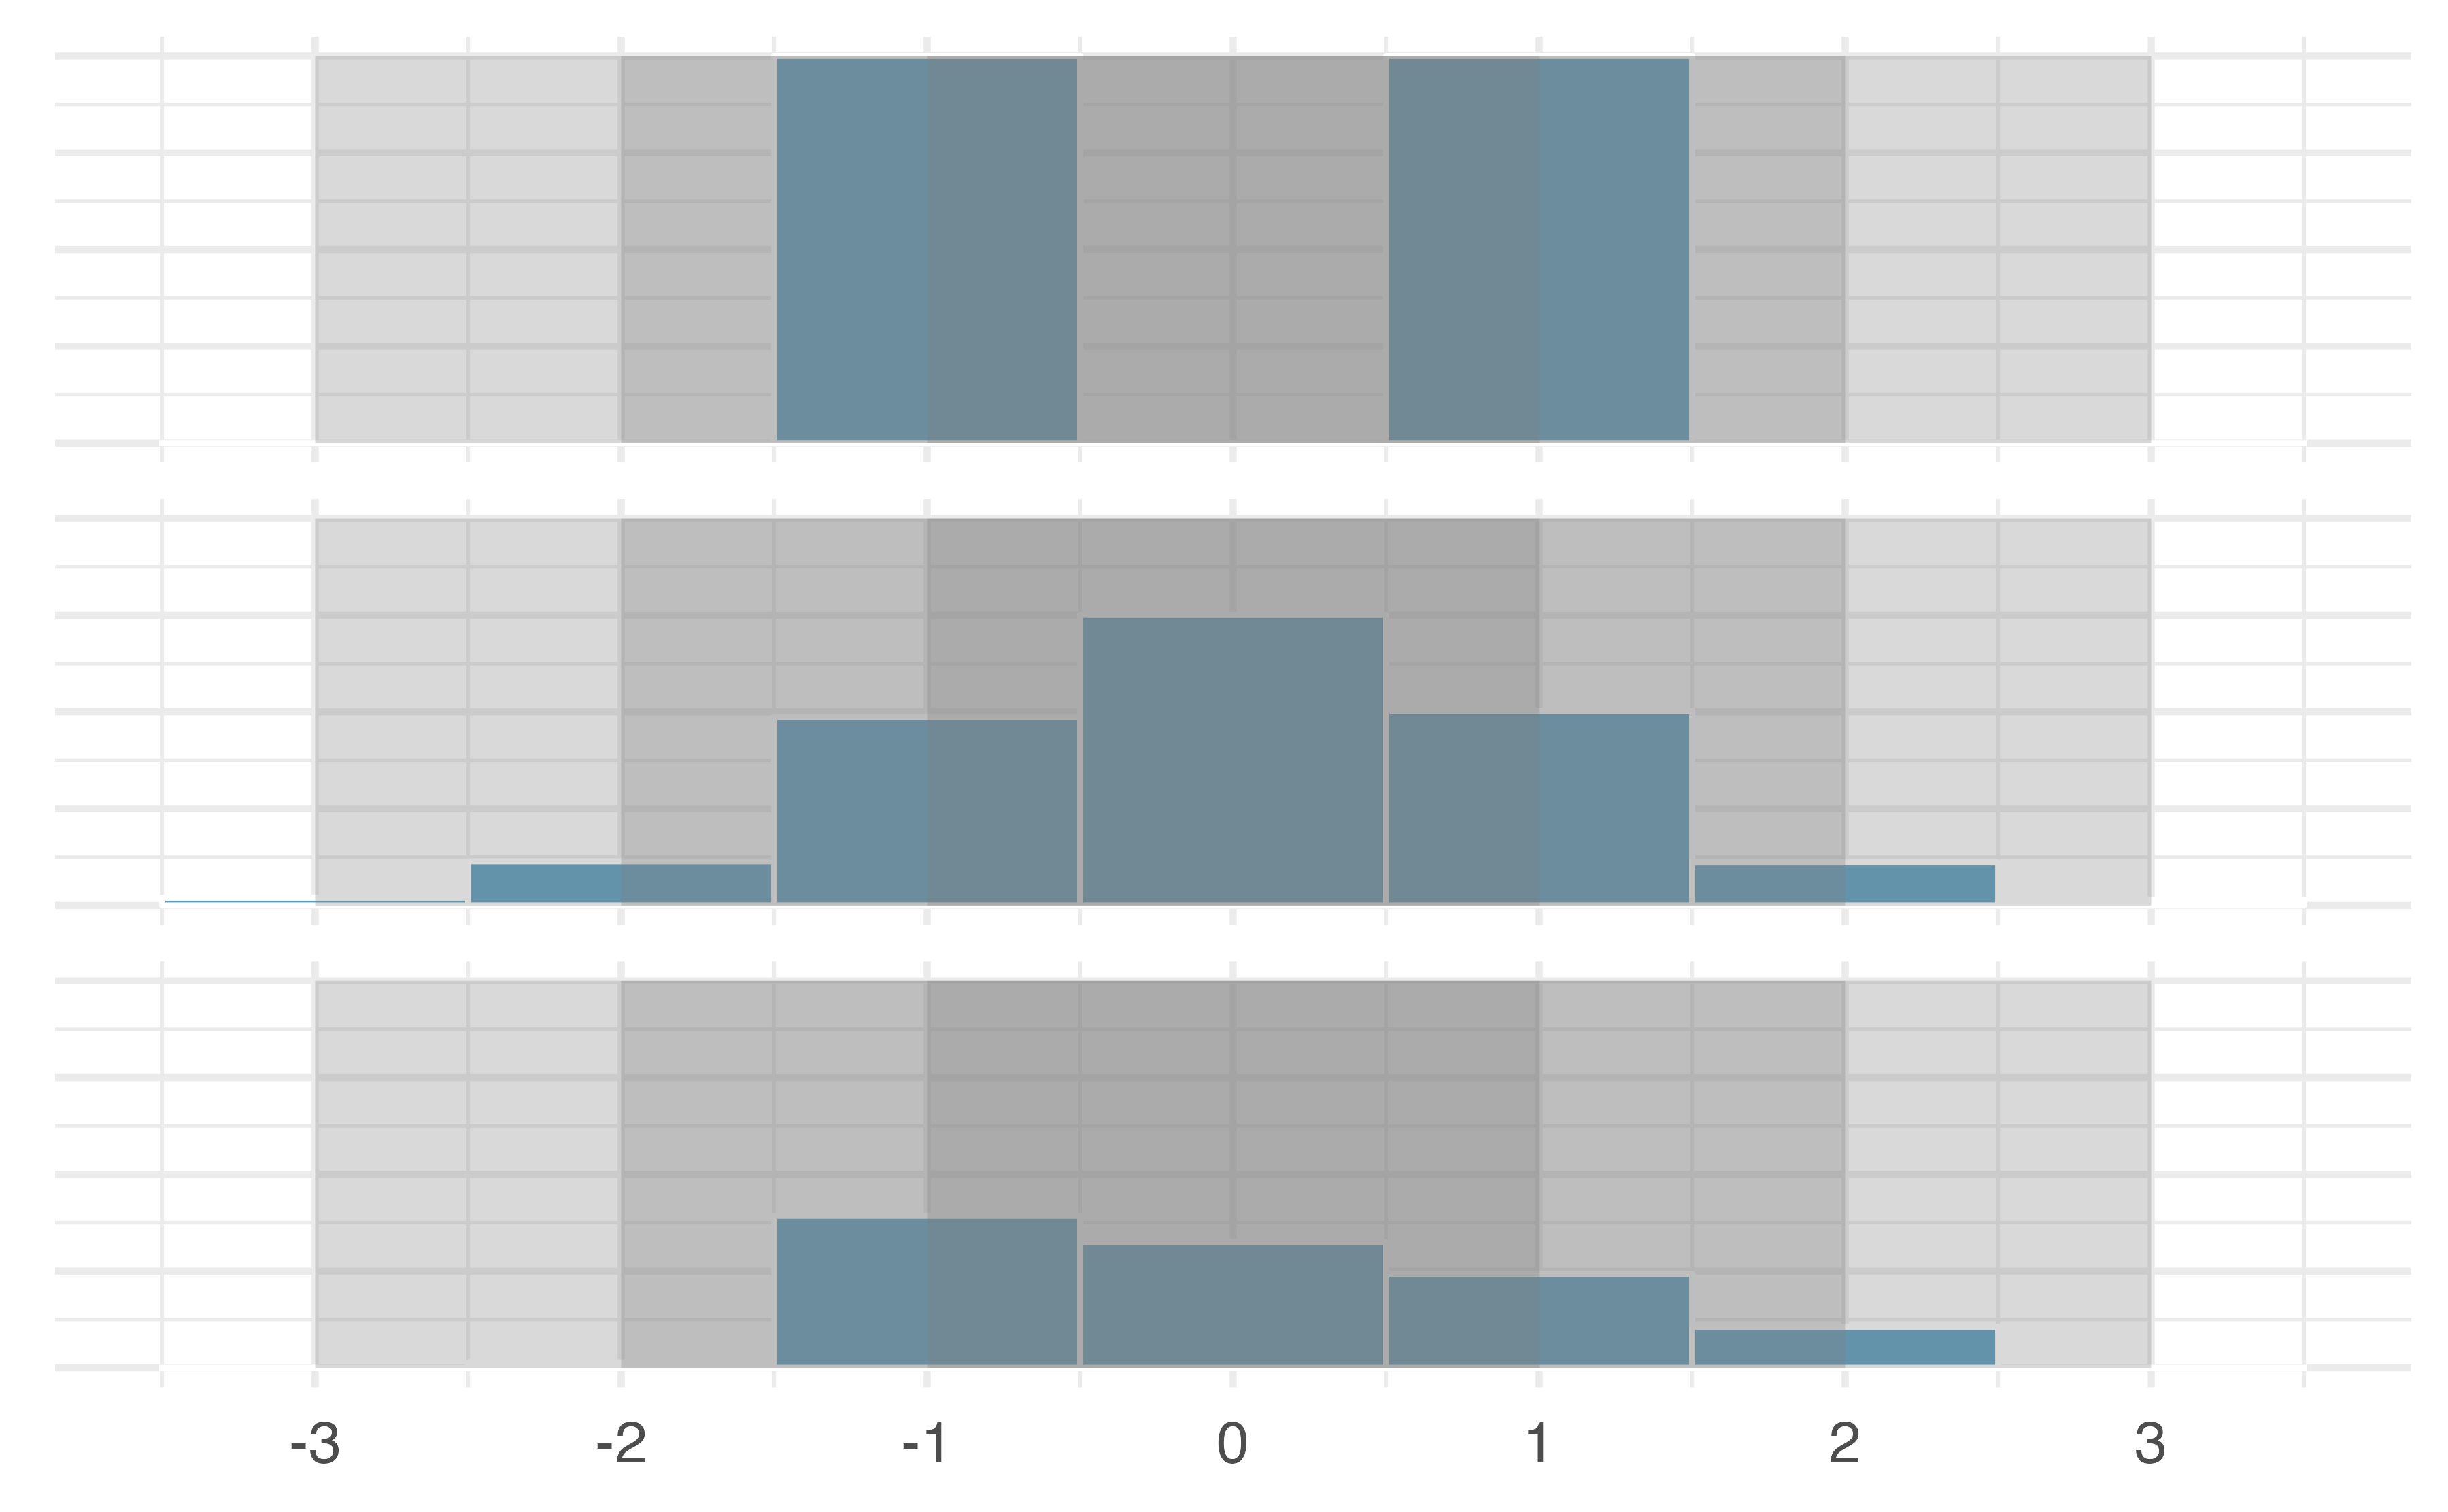 Three very different population distributions with the same mean (0) and standard deviation (1).